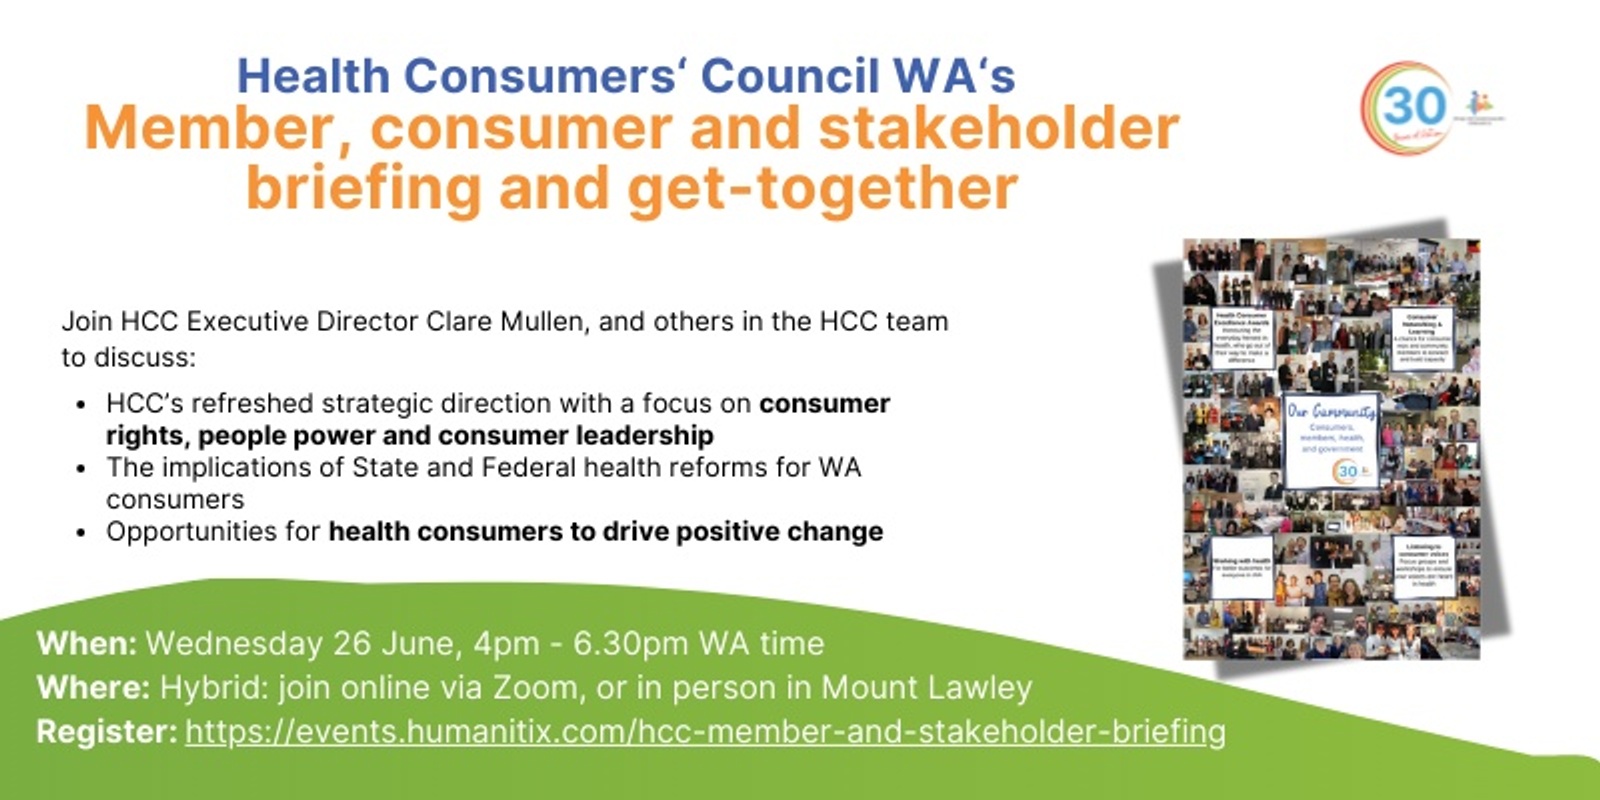 Banner image for HCC member, consumer and stakeholder briefing and get-together